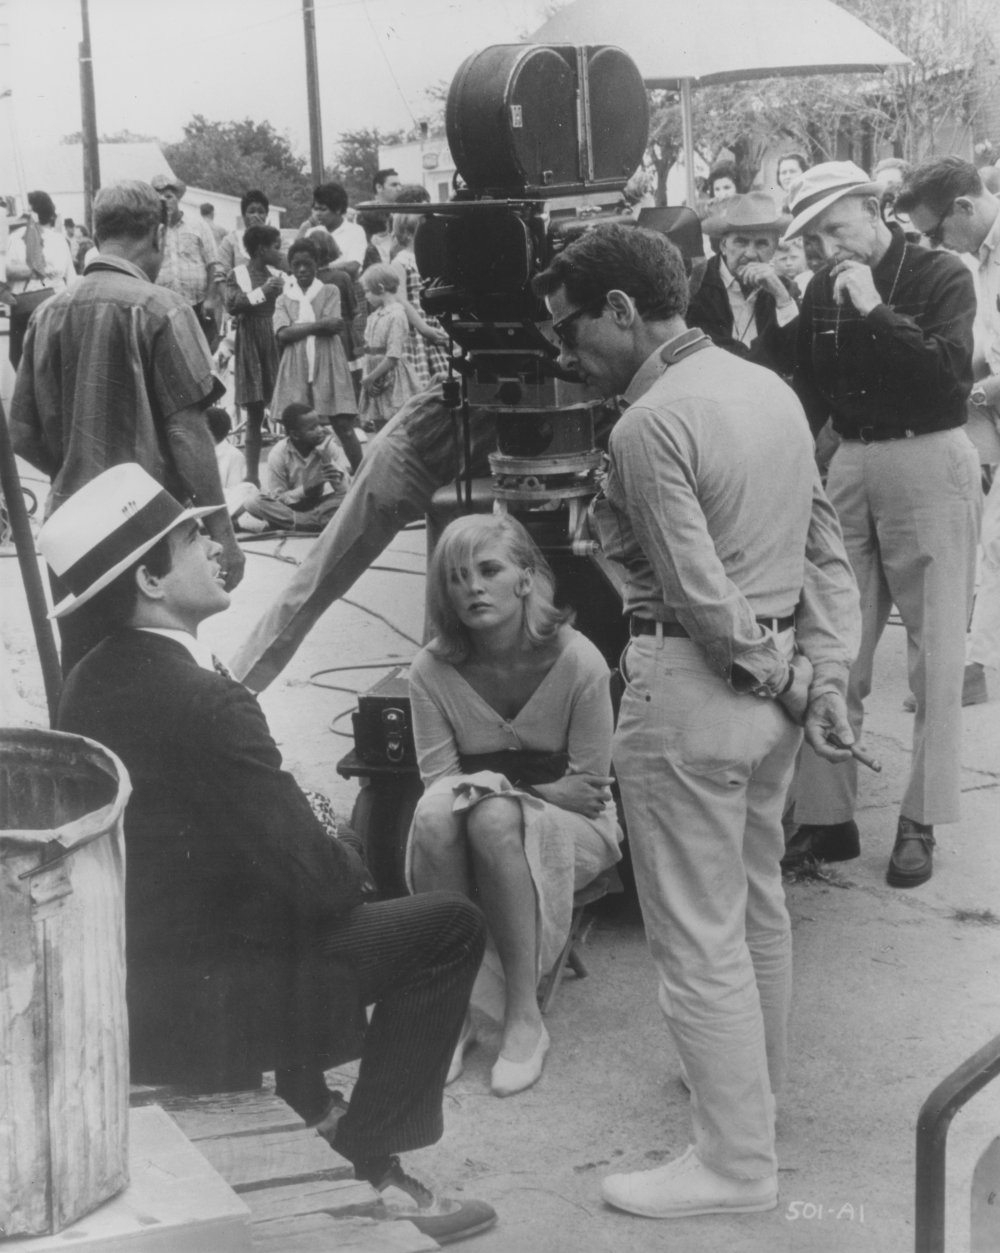 Directing Warren Beatty and Faye Dunaway in Bonnie and Clyde (1967)